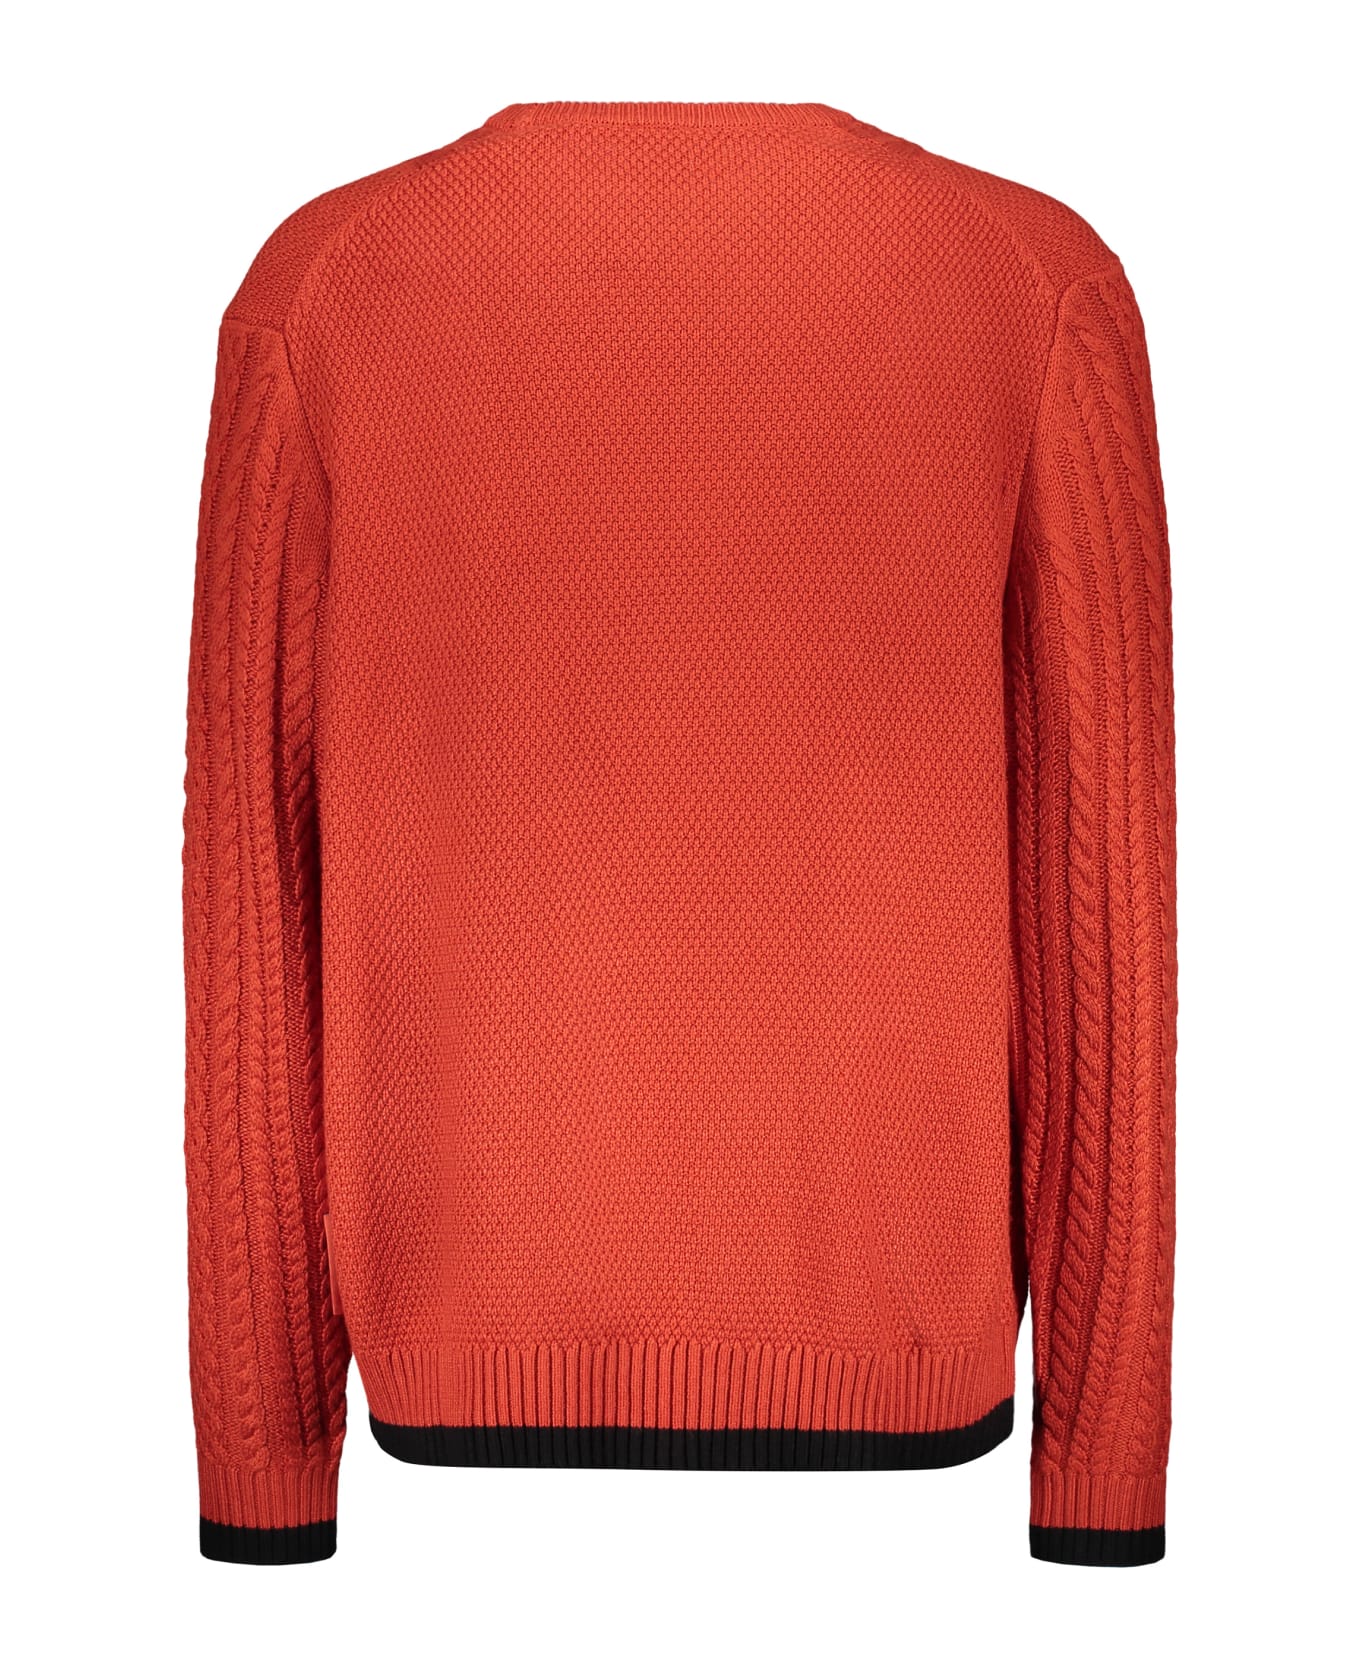 Armani Exchange Cable Knit Sweater - Copper ニットウェア